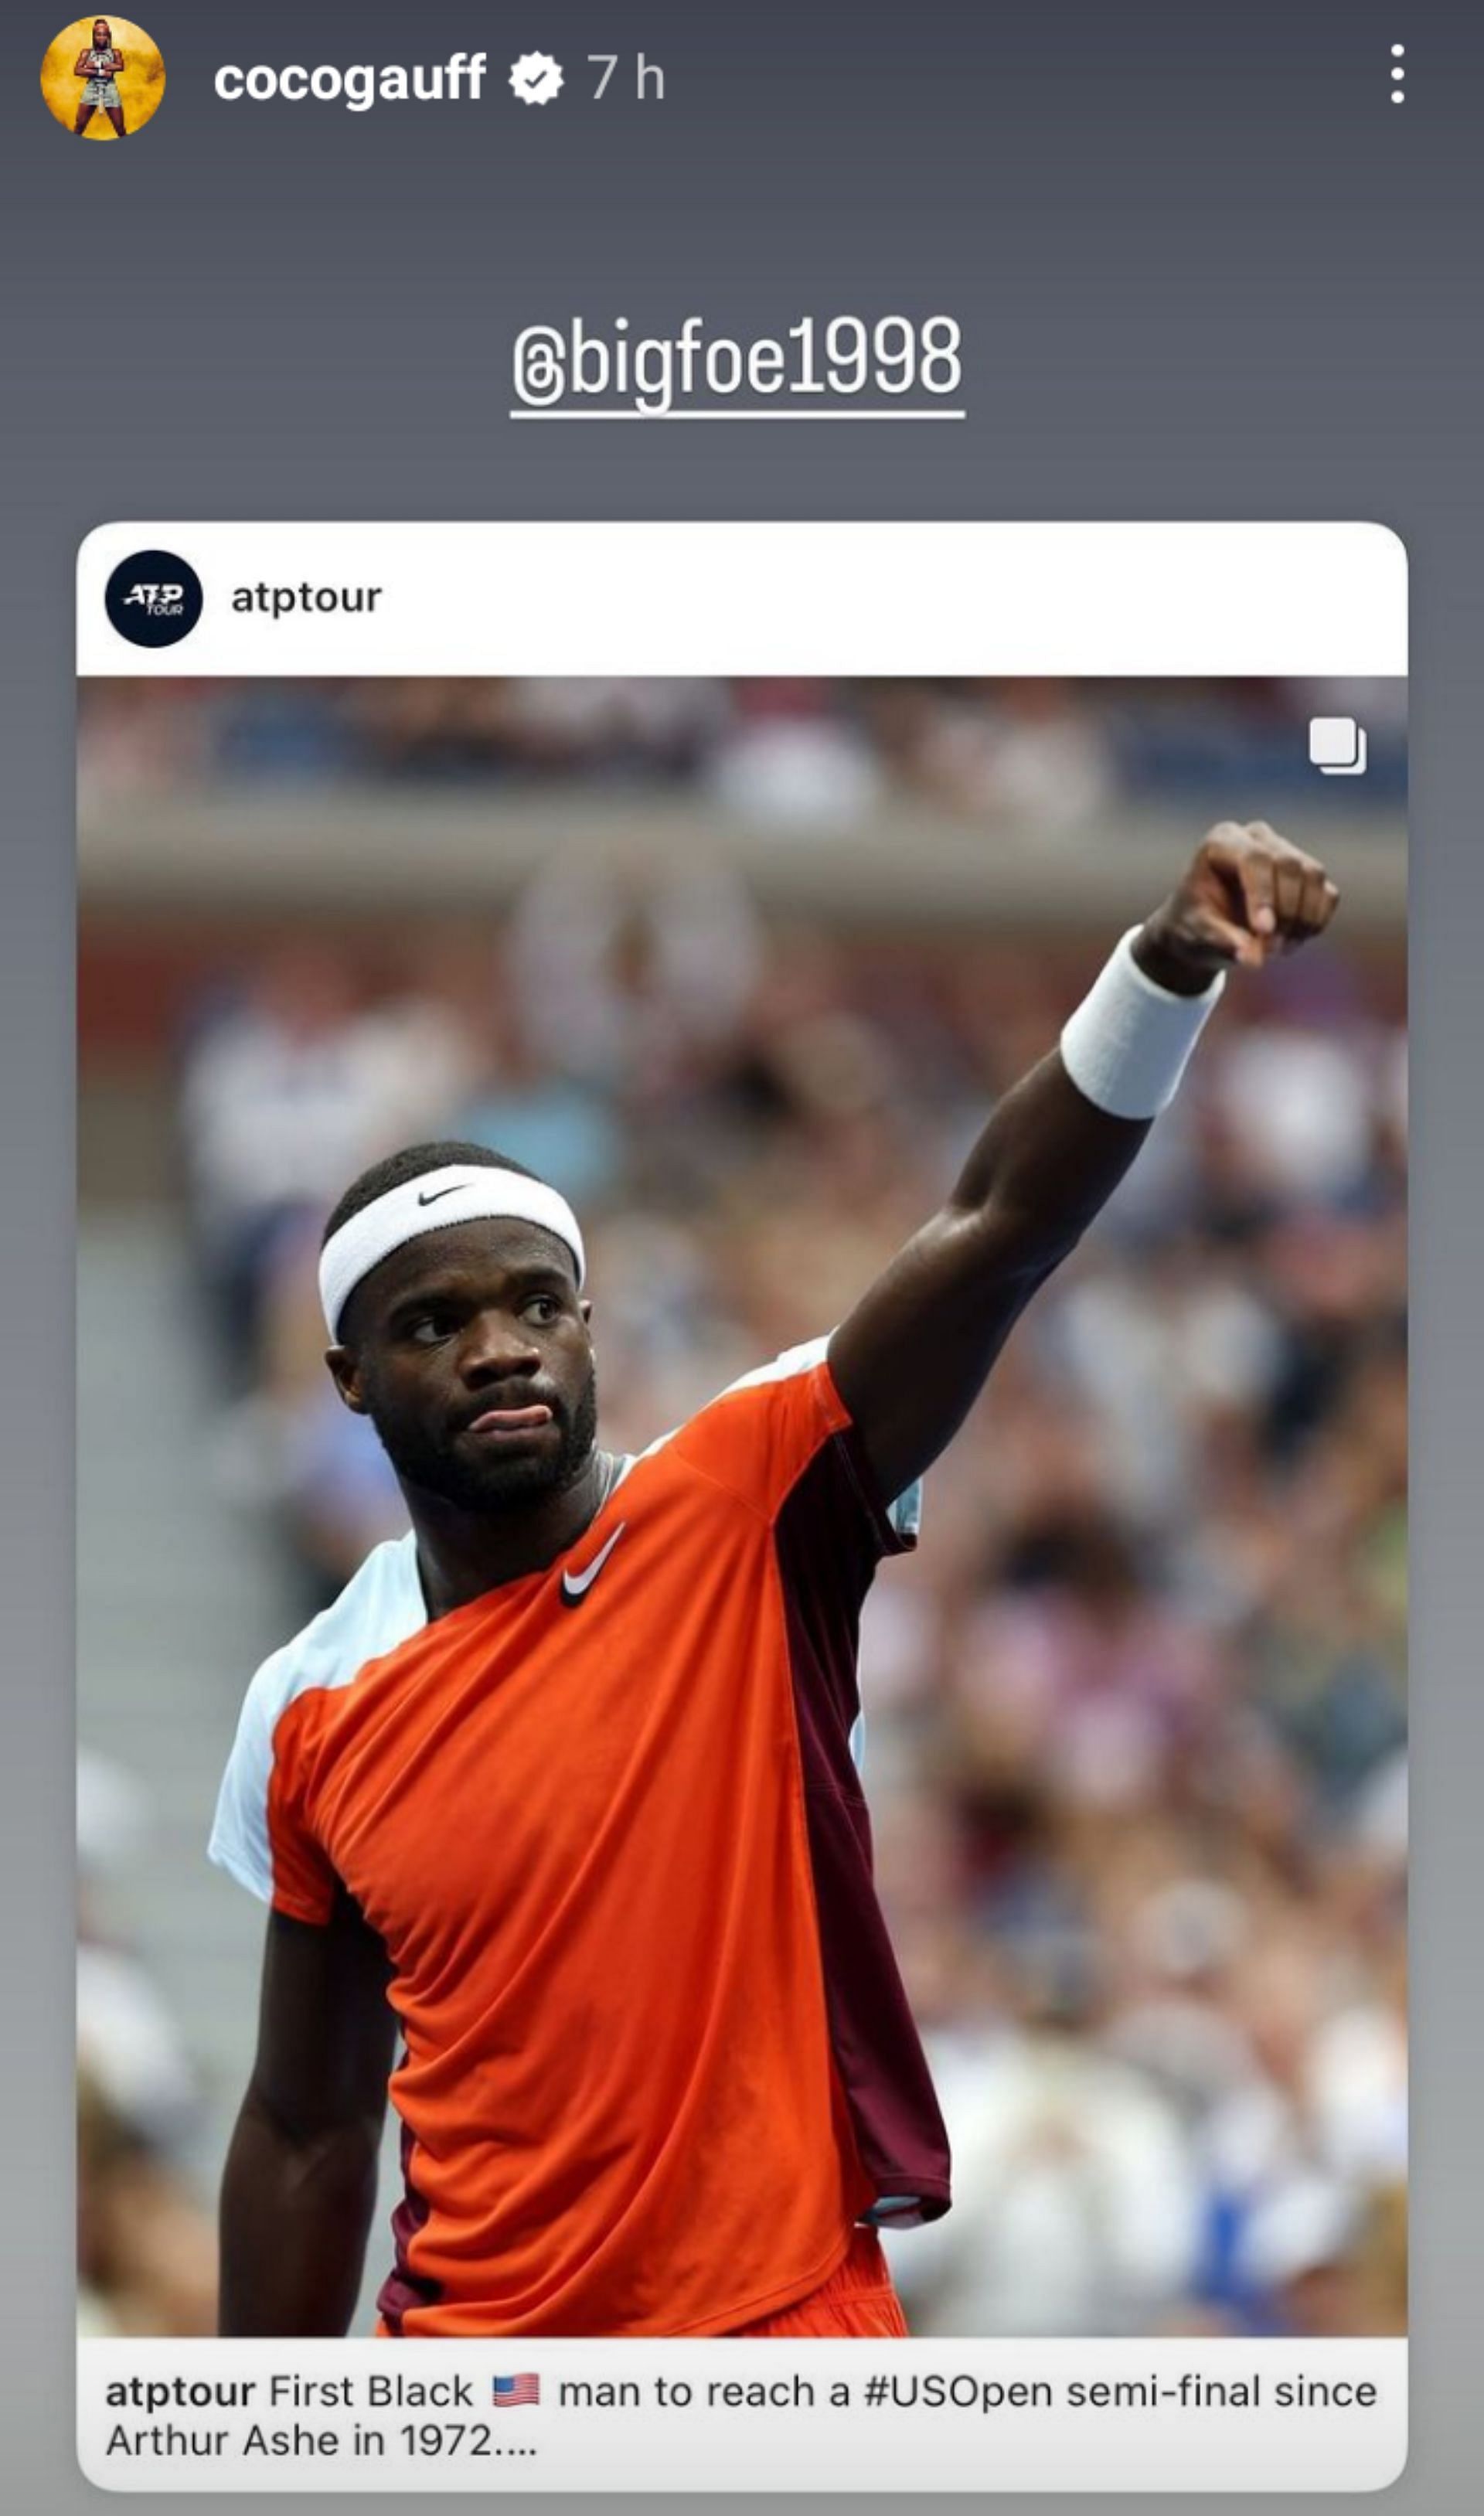 Coco Gauff shared ATP&#039;s post about Frances Tiafoe